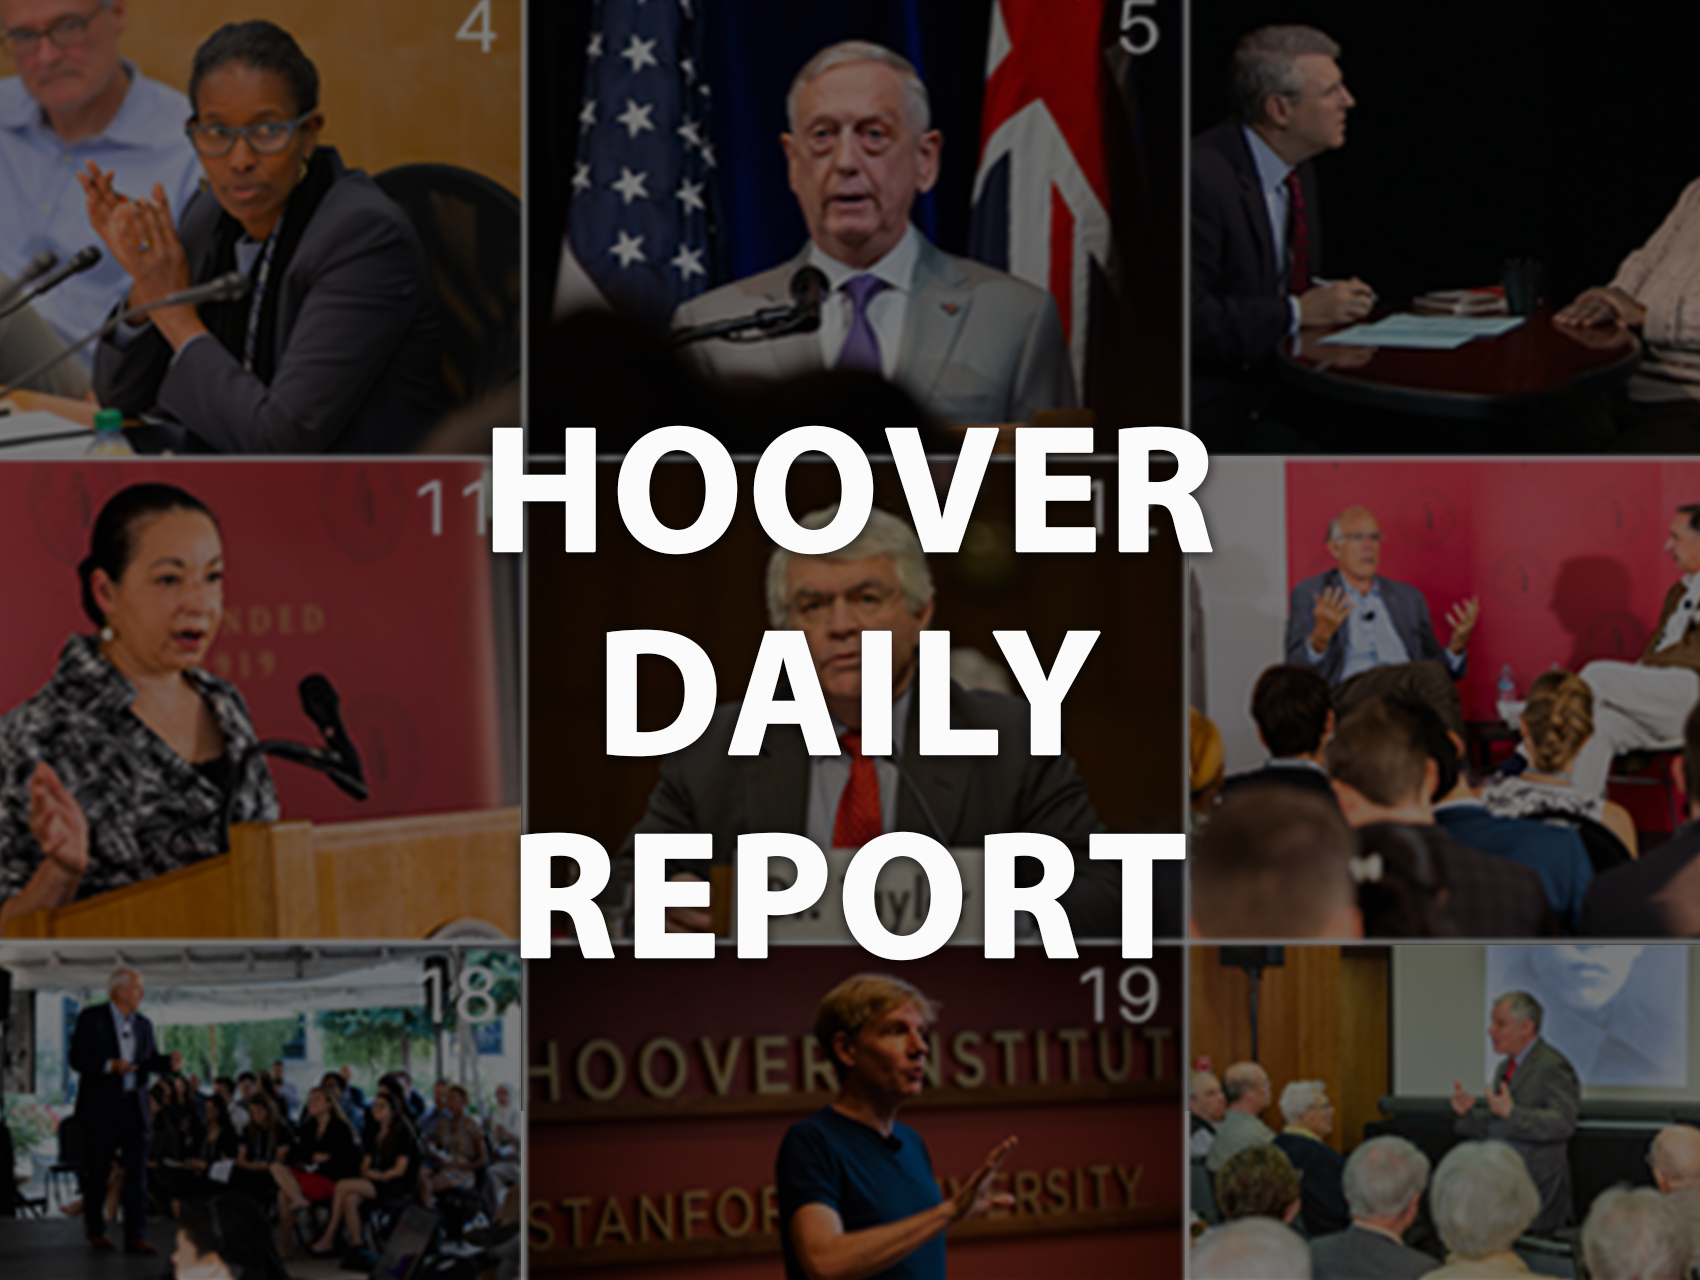 Hoover Daily Report | Hoover Institution